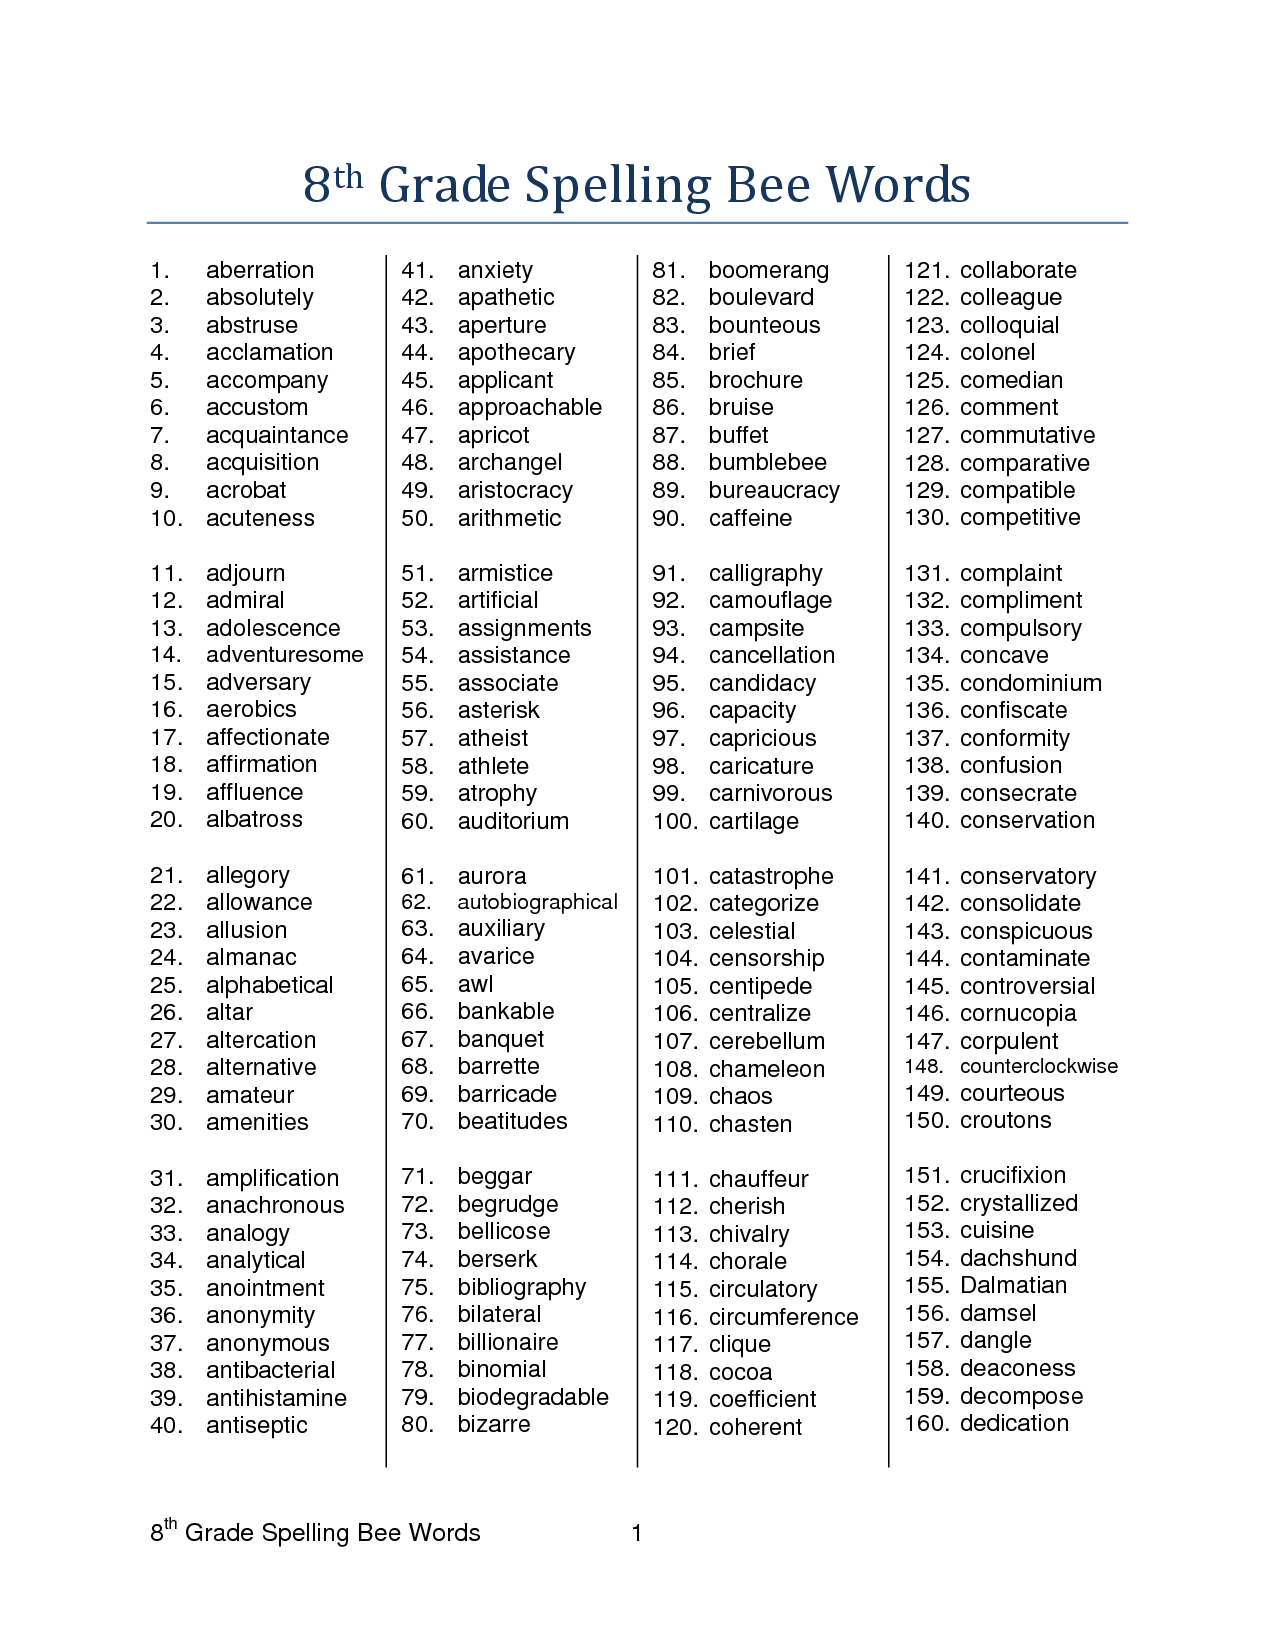 12-best-images-of-7th-grade-spelling-words-printable-worksheets-7th